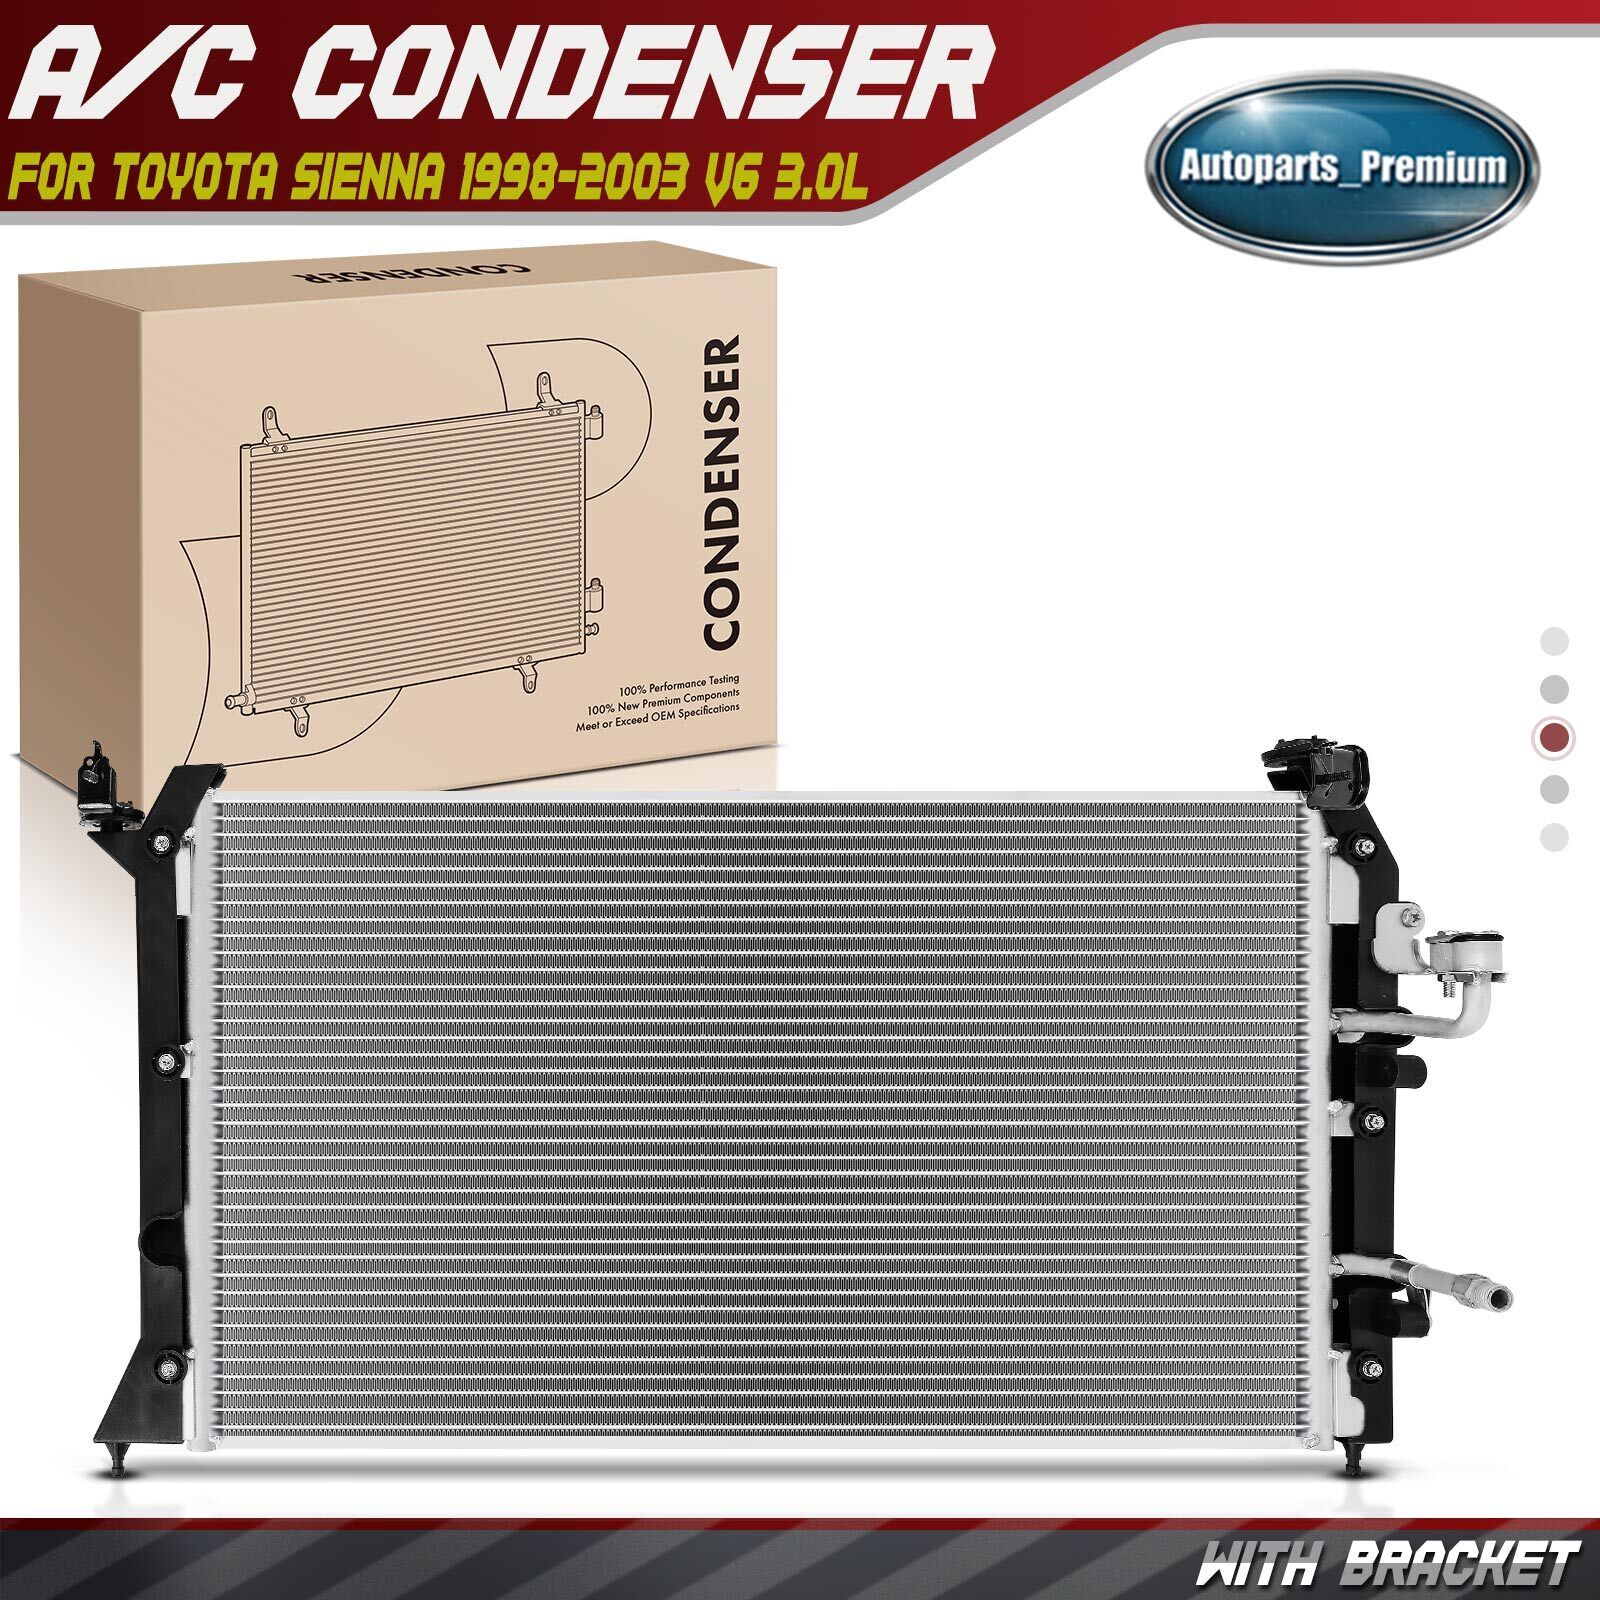 A/C AC Condenser with Bracket for Toyota Sienna 1998-2003 V6 3.0L 88460-08010